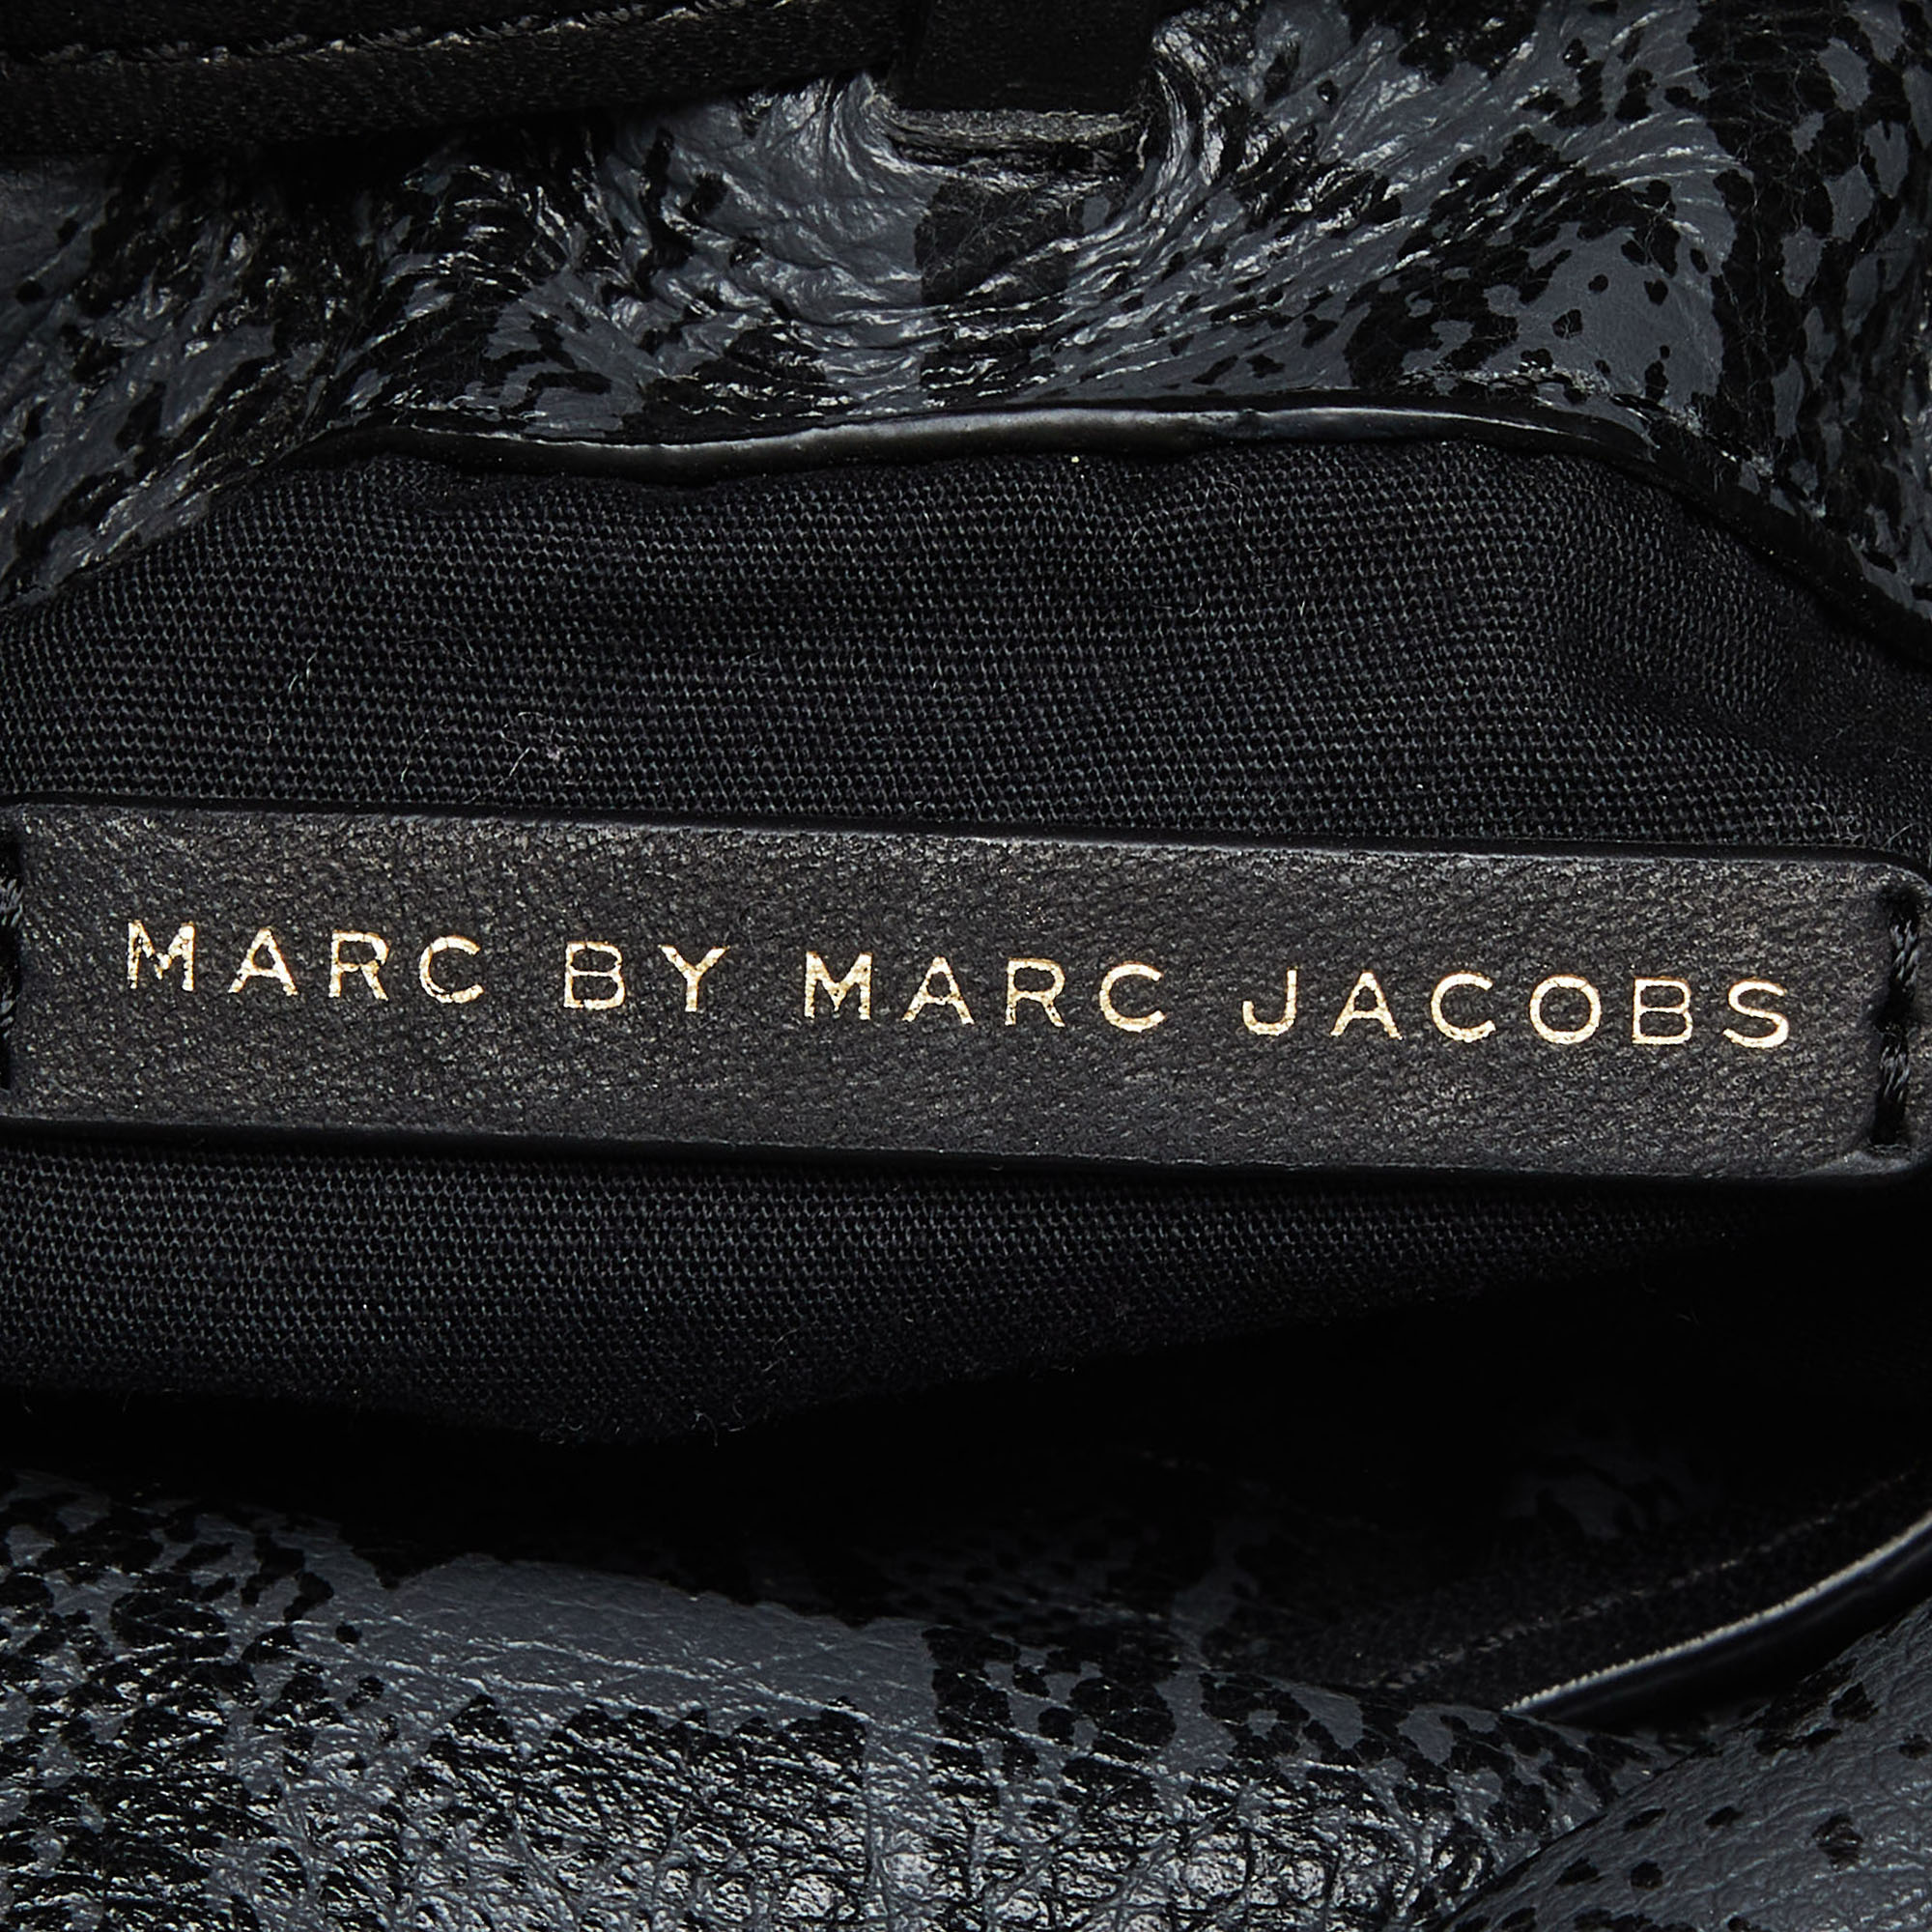 Marc By Marc Jacobs Tri Color Snakes Print Leather Bucket Bag